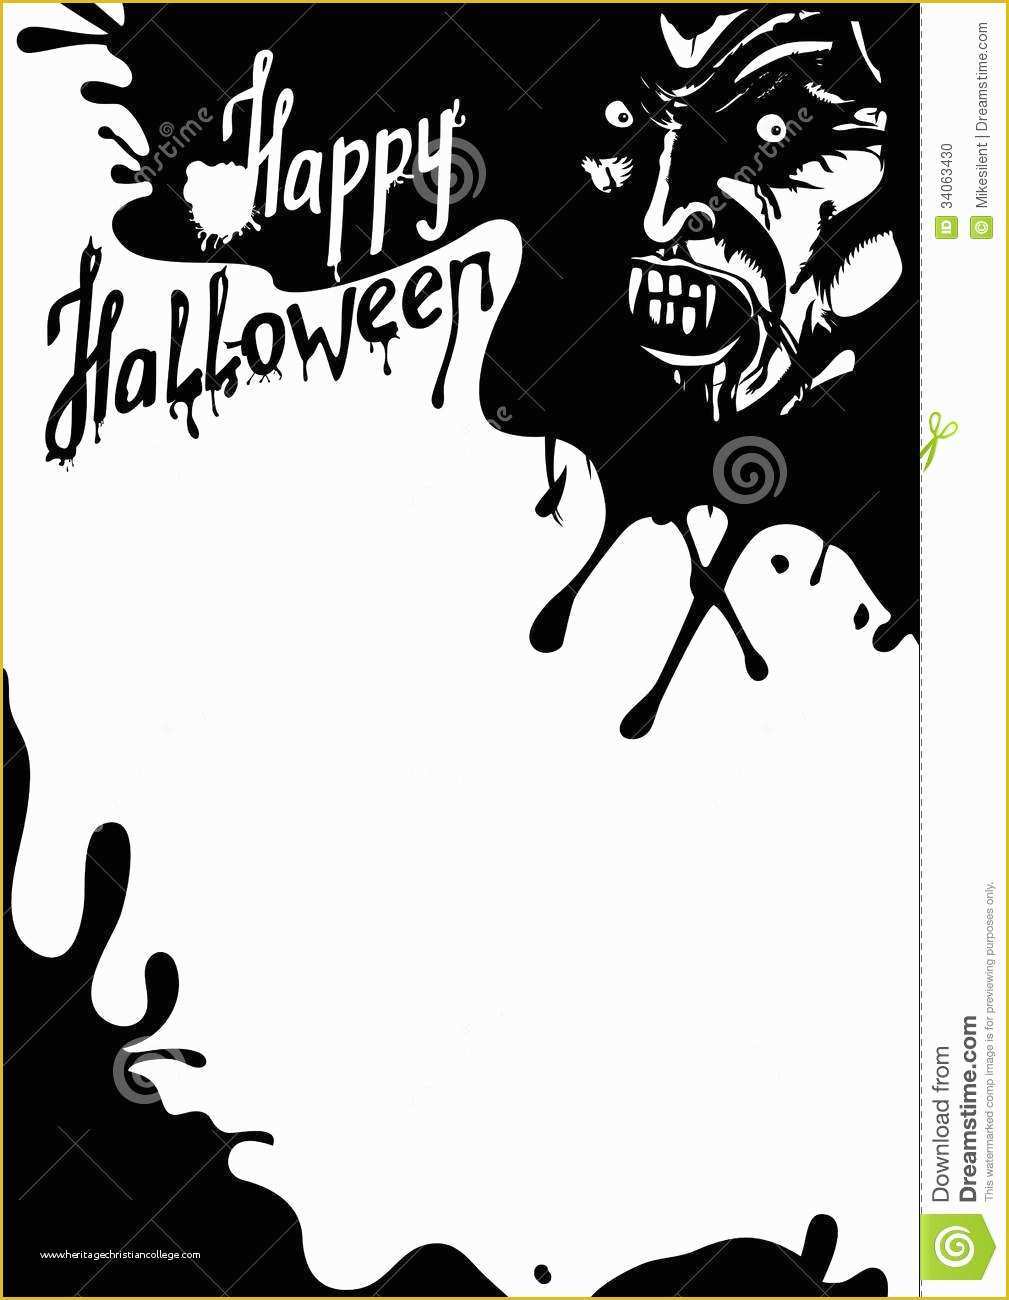 Black and White Flyer Template Free Of Halloween Vampire Greeting Card Stock Vector